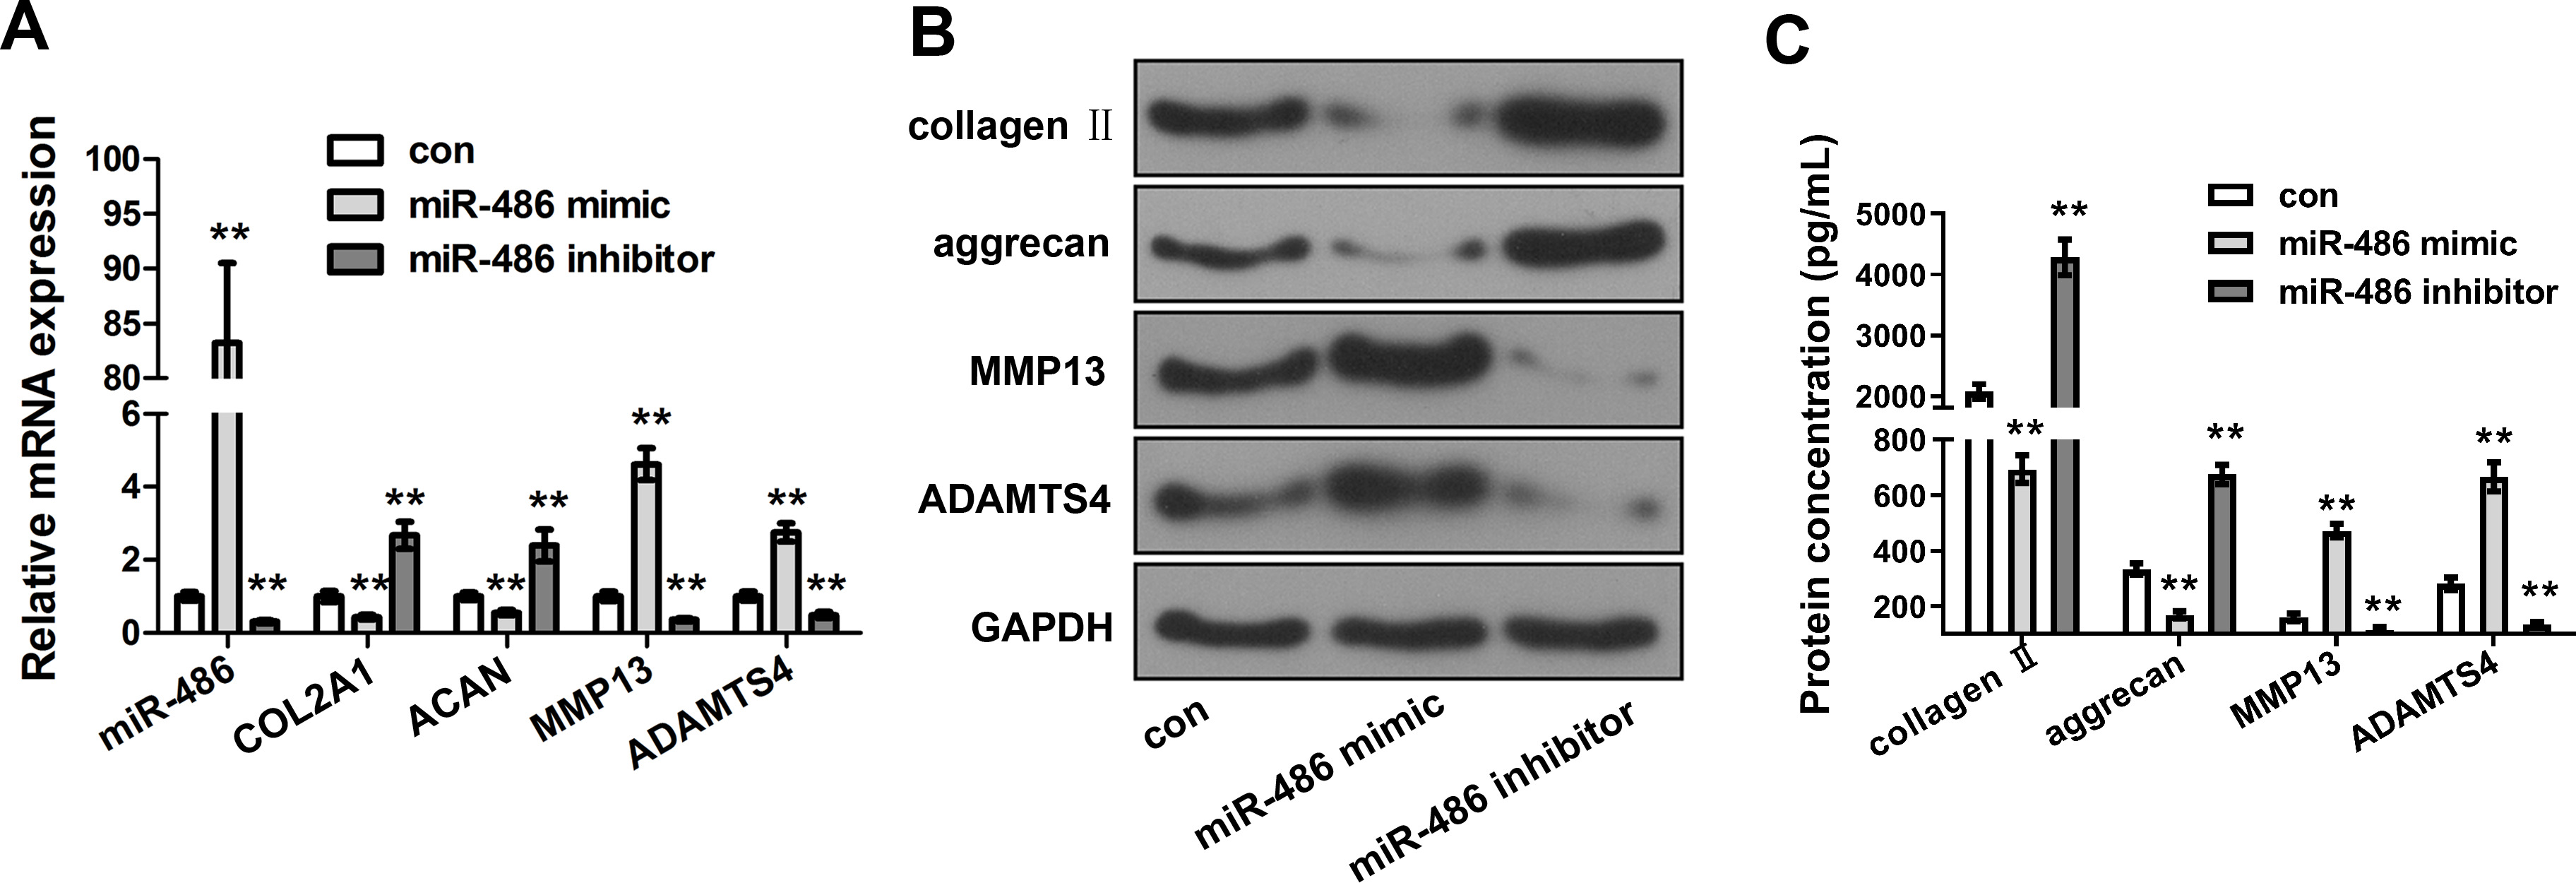 Fig. 2 
            Relationship between microRNA 486 (miR-486) and extracellular matrix (ECM) metabolism of SW1353 cells. a) and b) Detection of the messenger RNA (mRNA) and protein expressions of miR-486, collagen, type II, alpha 1 (COL2A1), aggrecan (ACAN), matrix metalloproteinase (MMP)-13, and ACANase 4 (ADAMTS4) by quantitative real-time polymerase chain reaction (qRT-PCR) (a) and Western blotting (b). c) Detection of the secretions of COL2A1, aggrecan, MMP-13, and ADAMTS4 by enzyme-linked immunosorbent assay (ELISA). Compared with the control group (con), **p < 0.01, independent-samples t-test. GAPDH, glyceraldehyde 3-phosphate dehydrogenase.
          